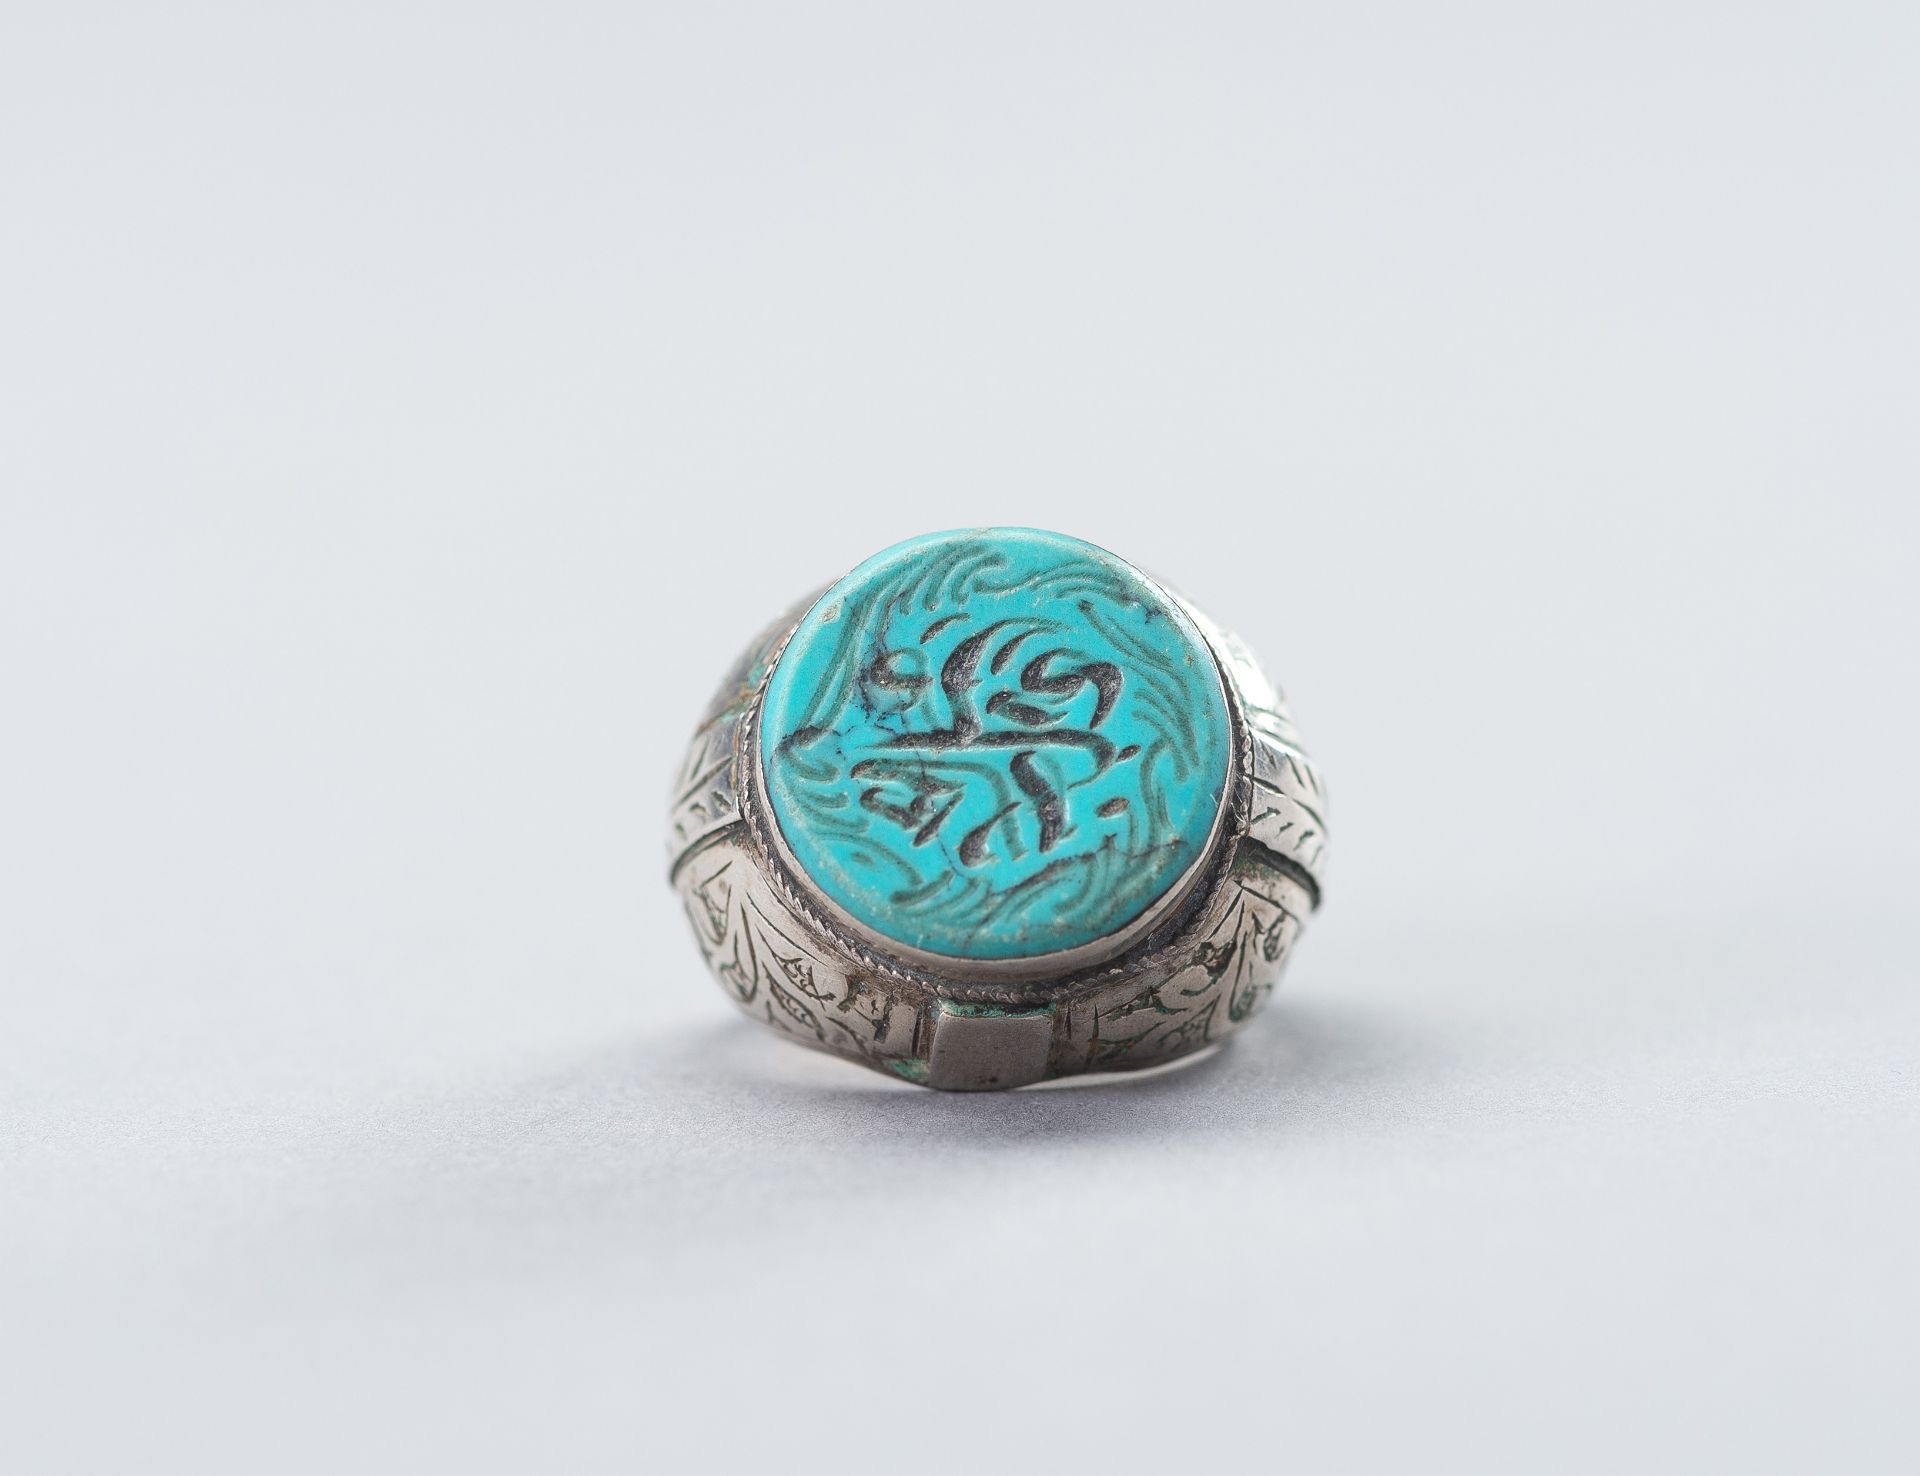 A PERSIAN SILVER RING WITH TURQUOISE MATRIX INTAGLIO, 19TH CENTURY